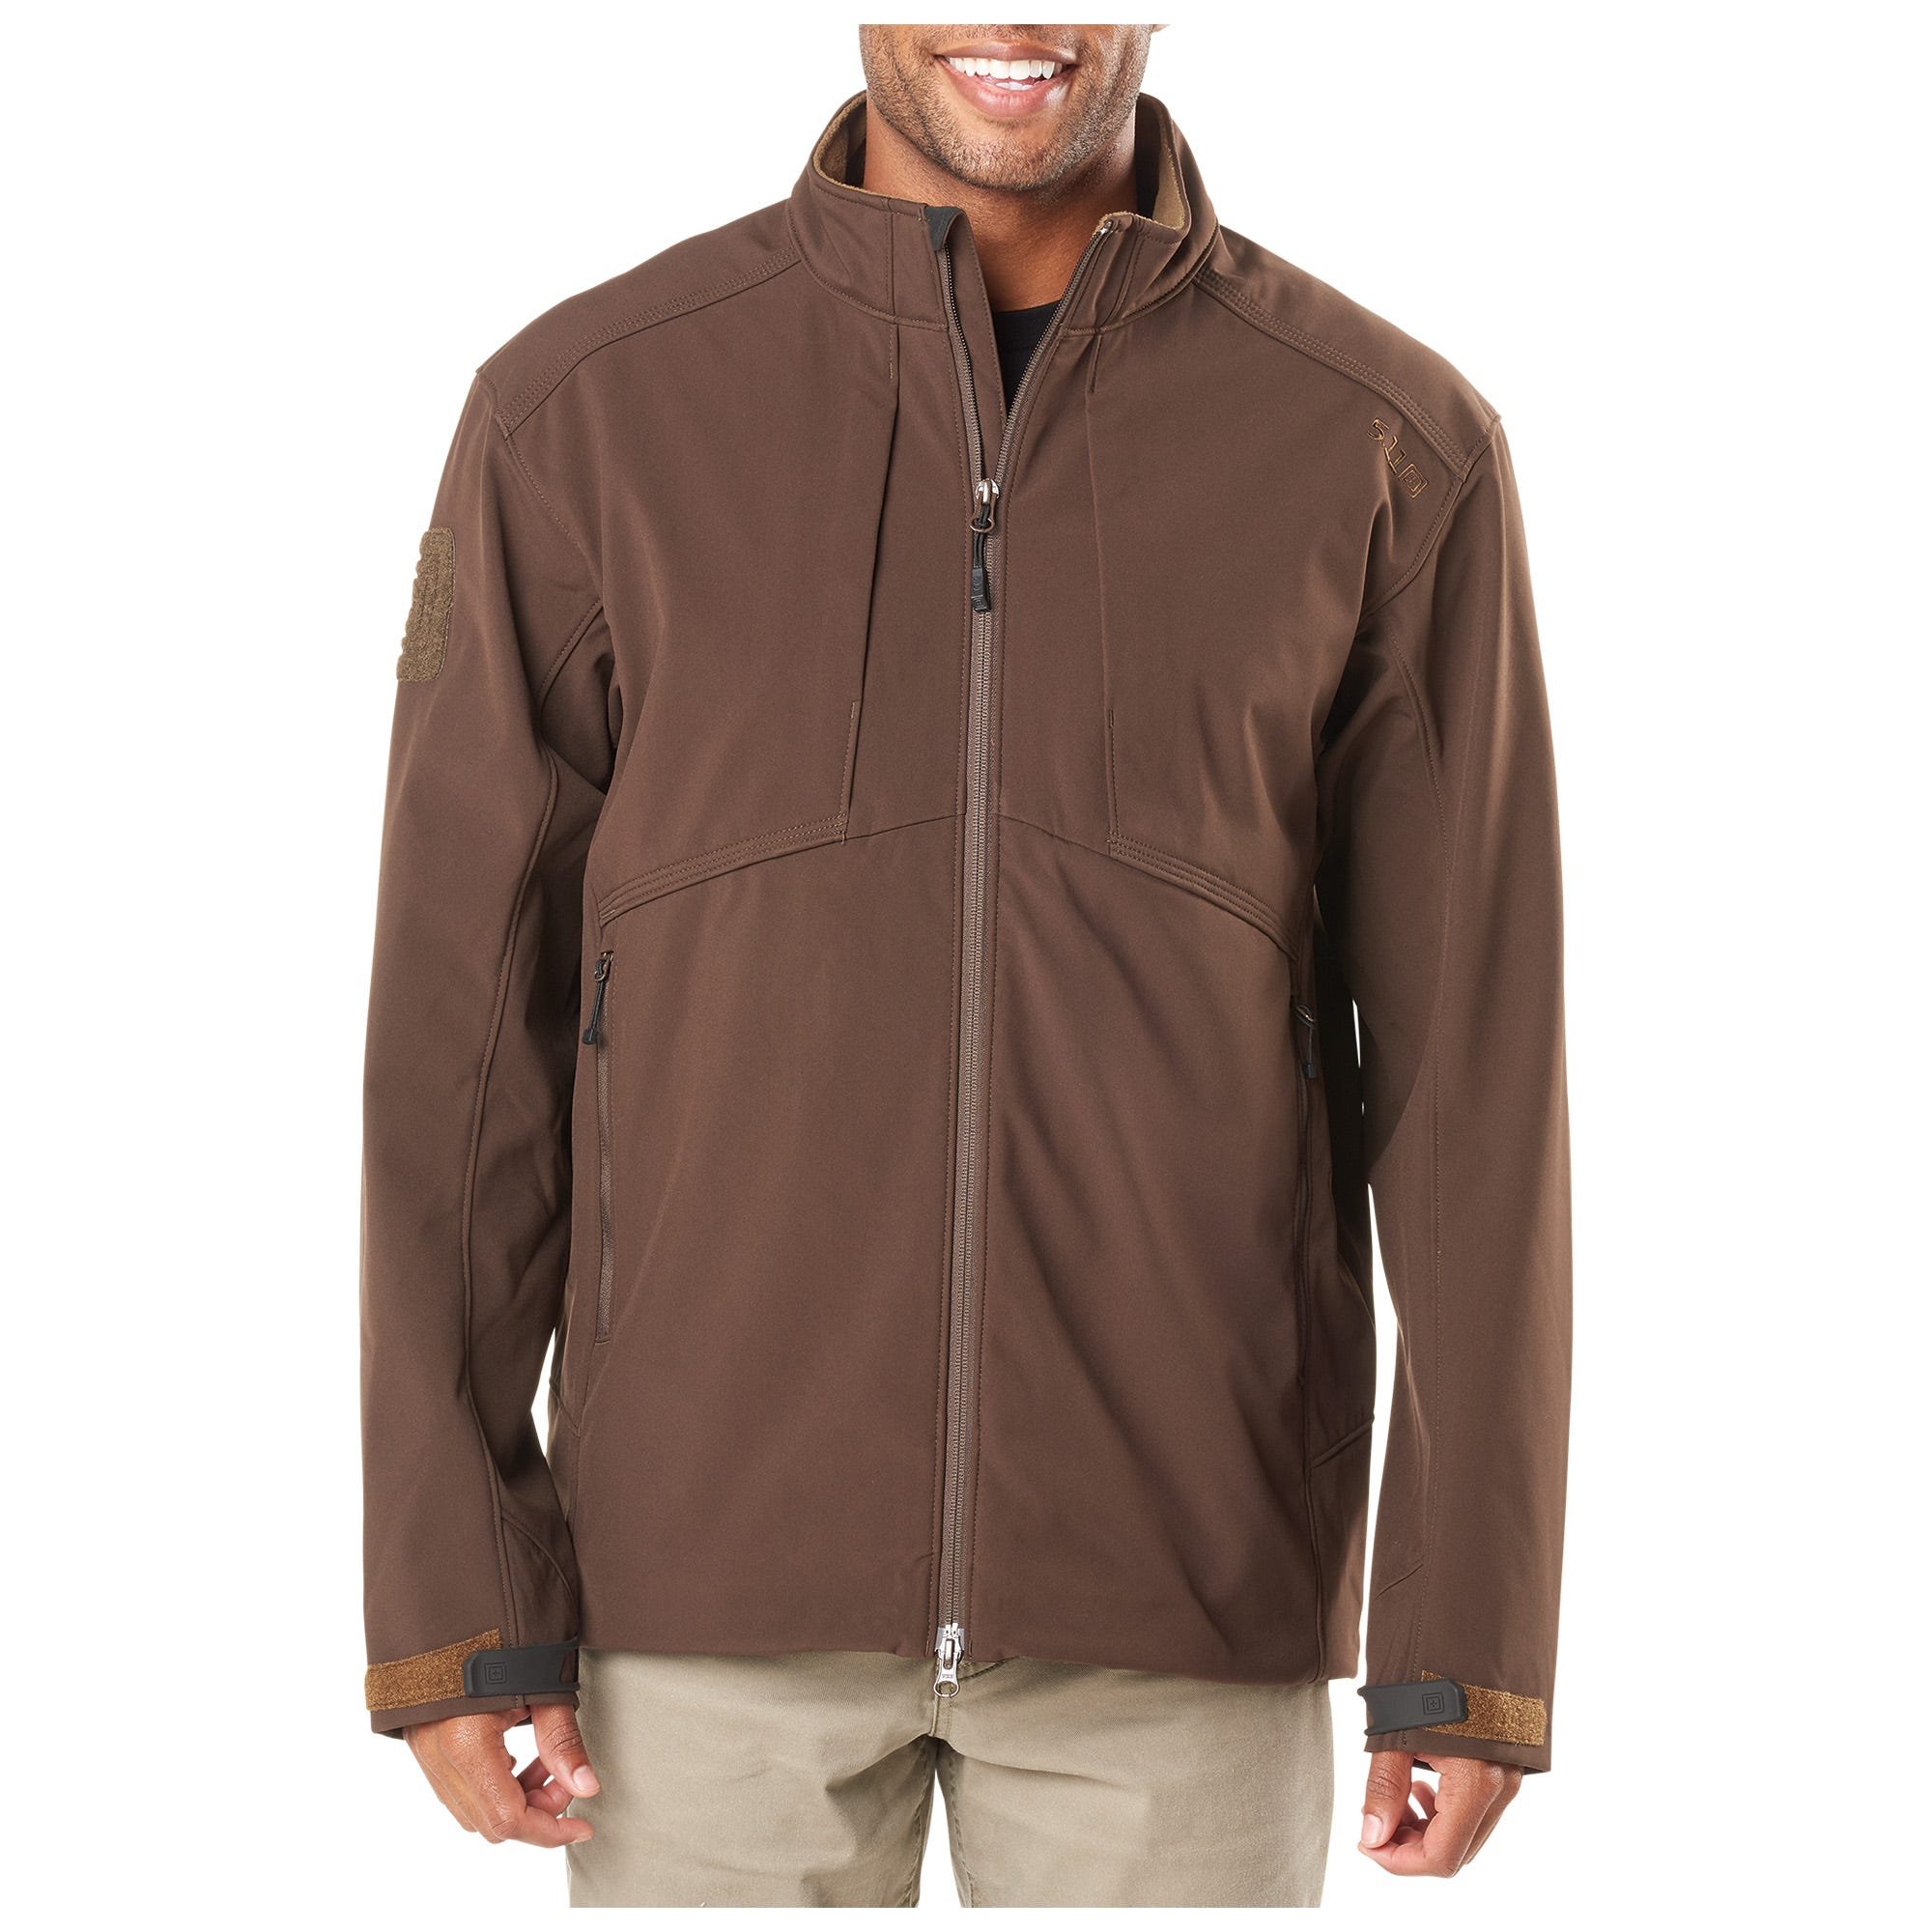 5.11 Tactical Men's Sierra Soft-Shell Jacket, All-Weather Comfort, Style  78005 | eBay